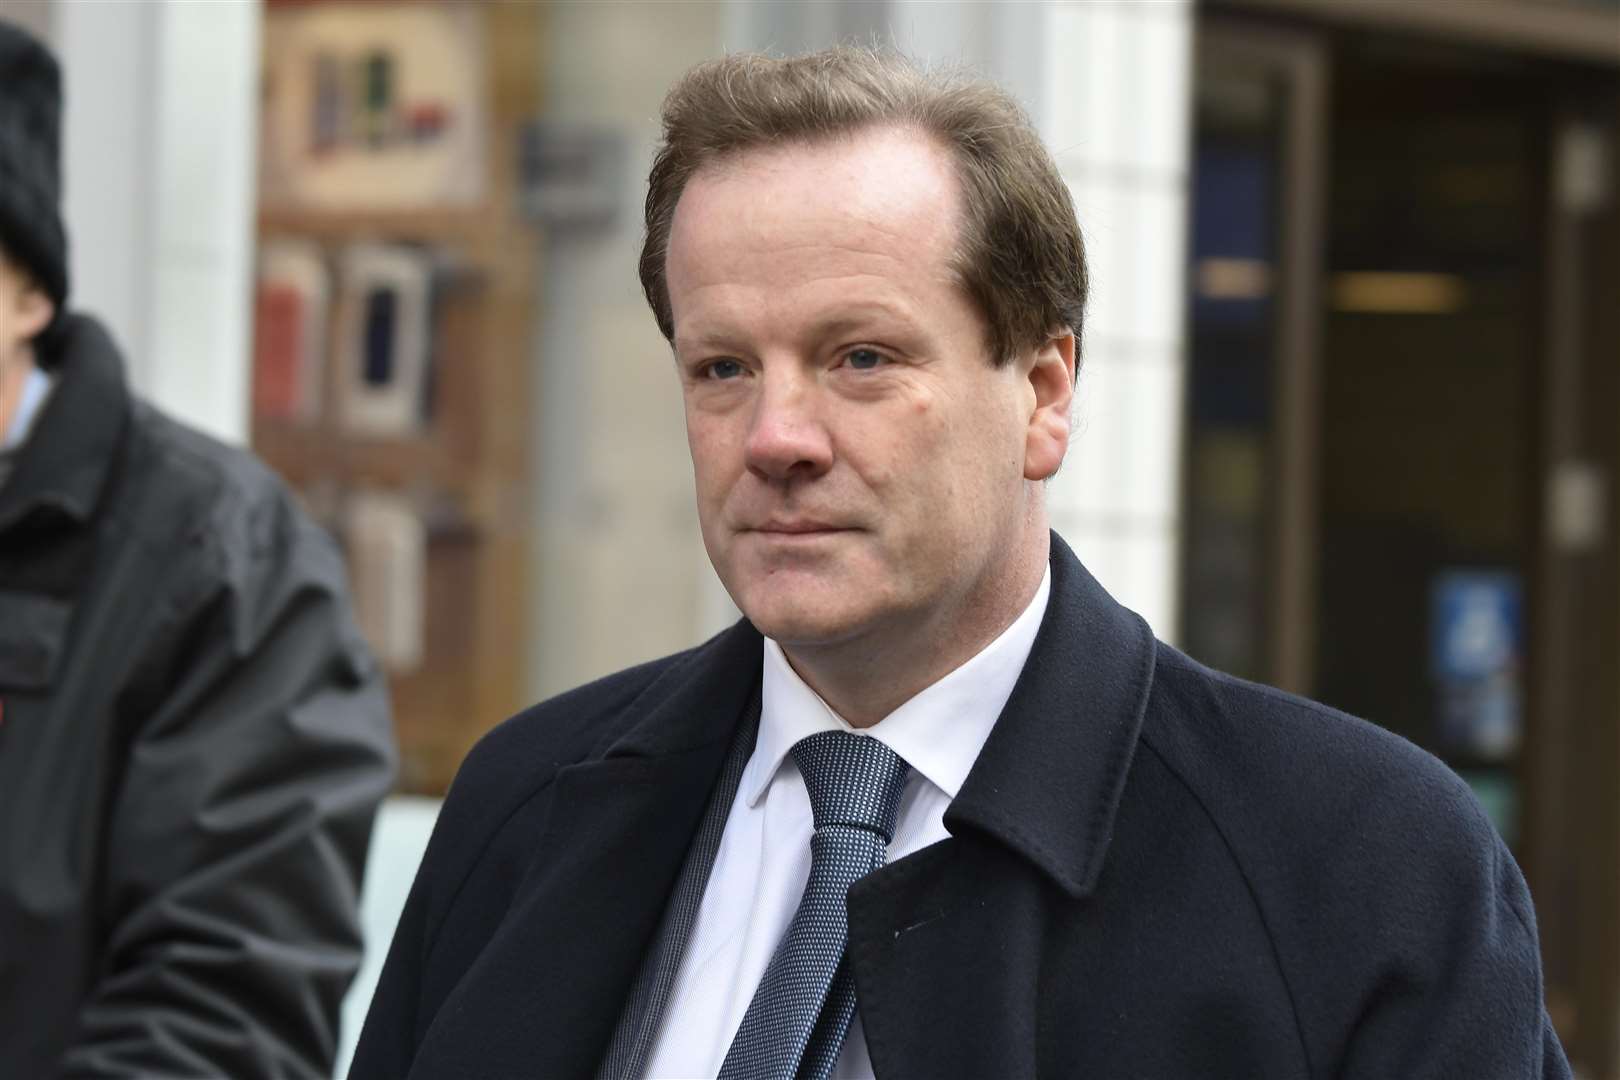 Charlie Elphicke said: "People need to be able to get to work and carry on as normal”